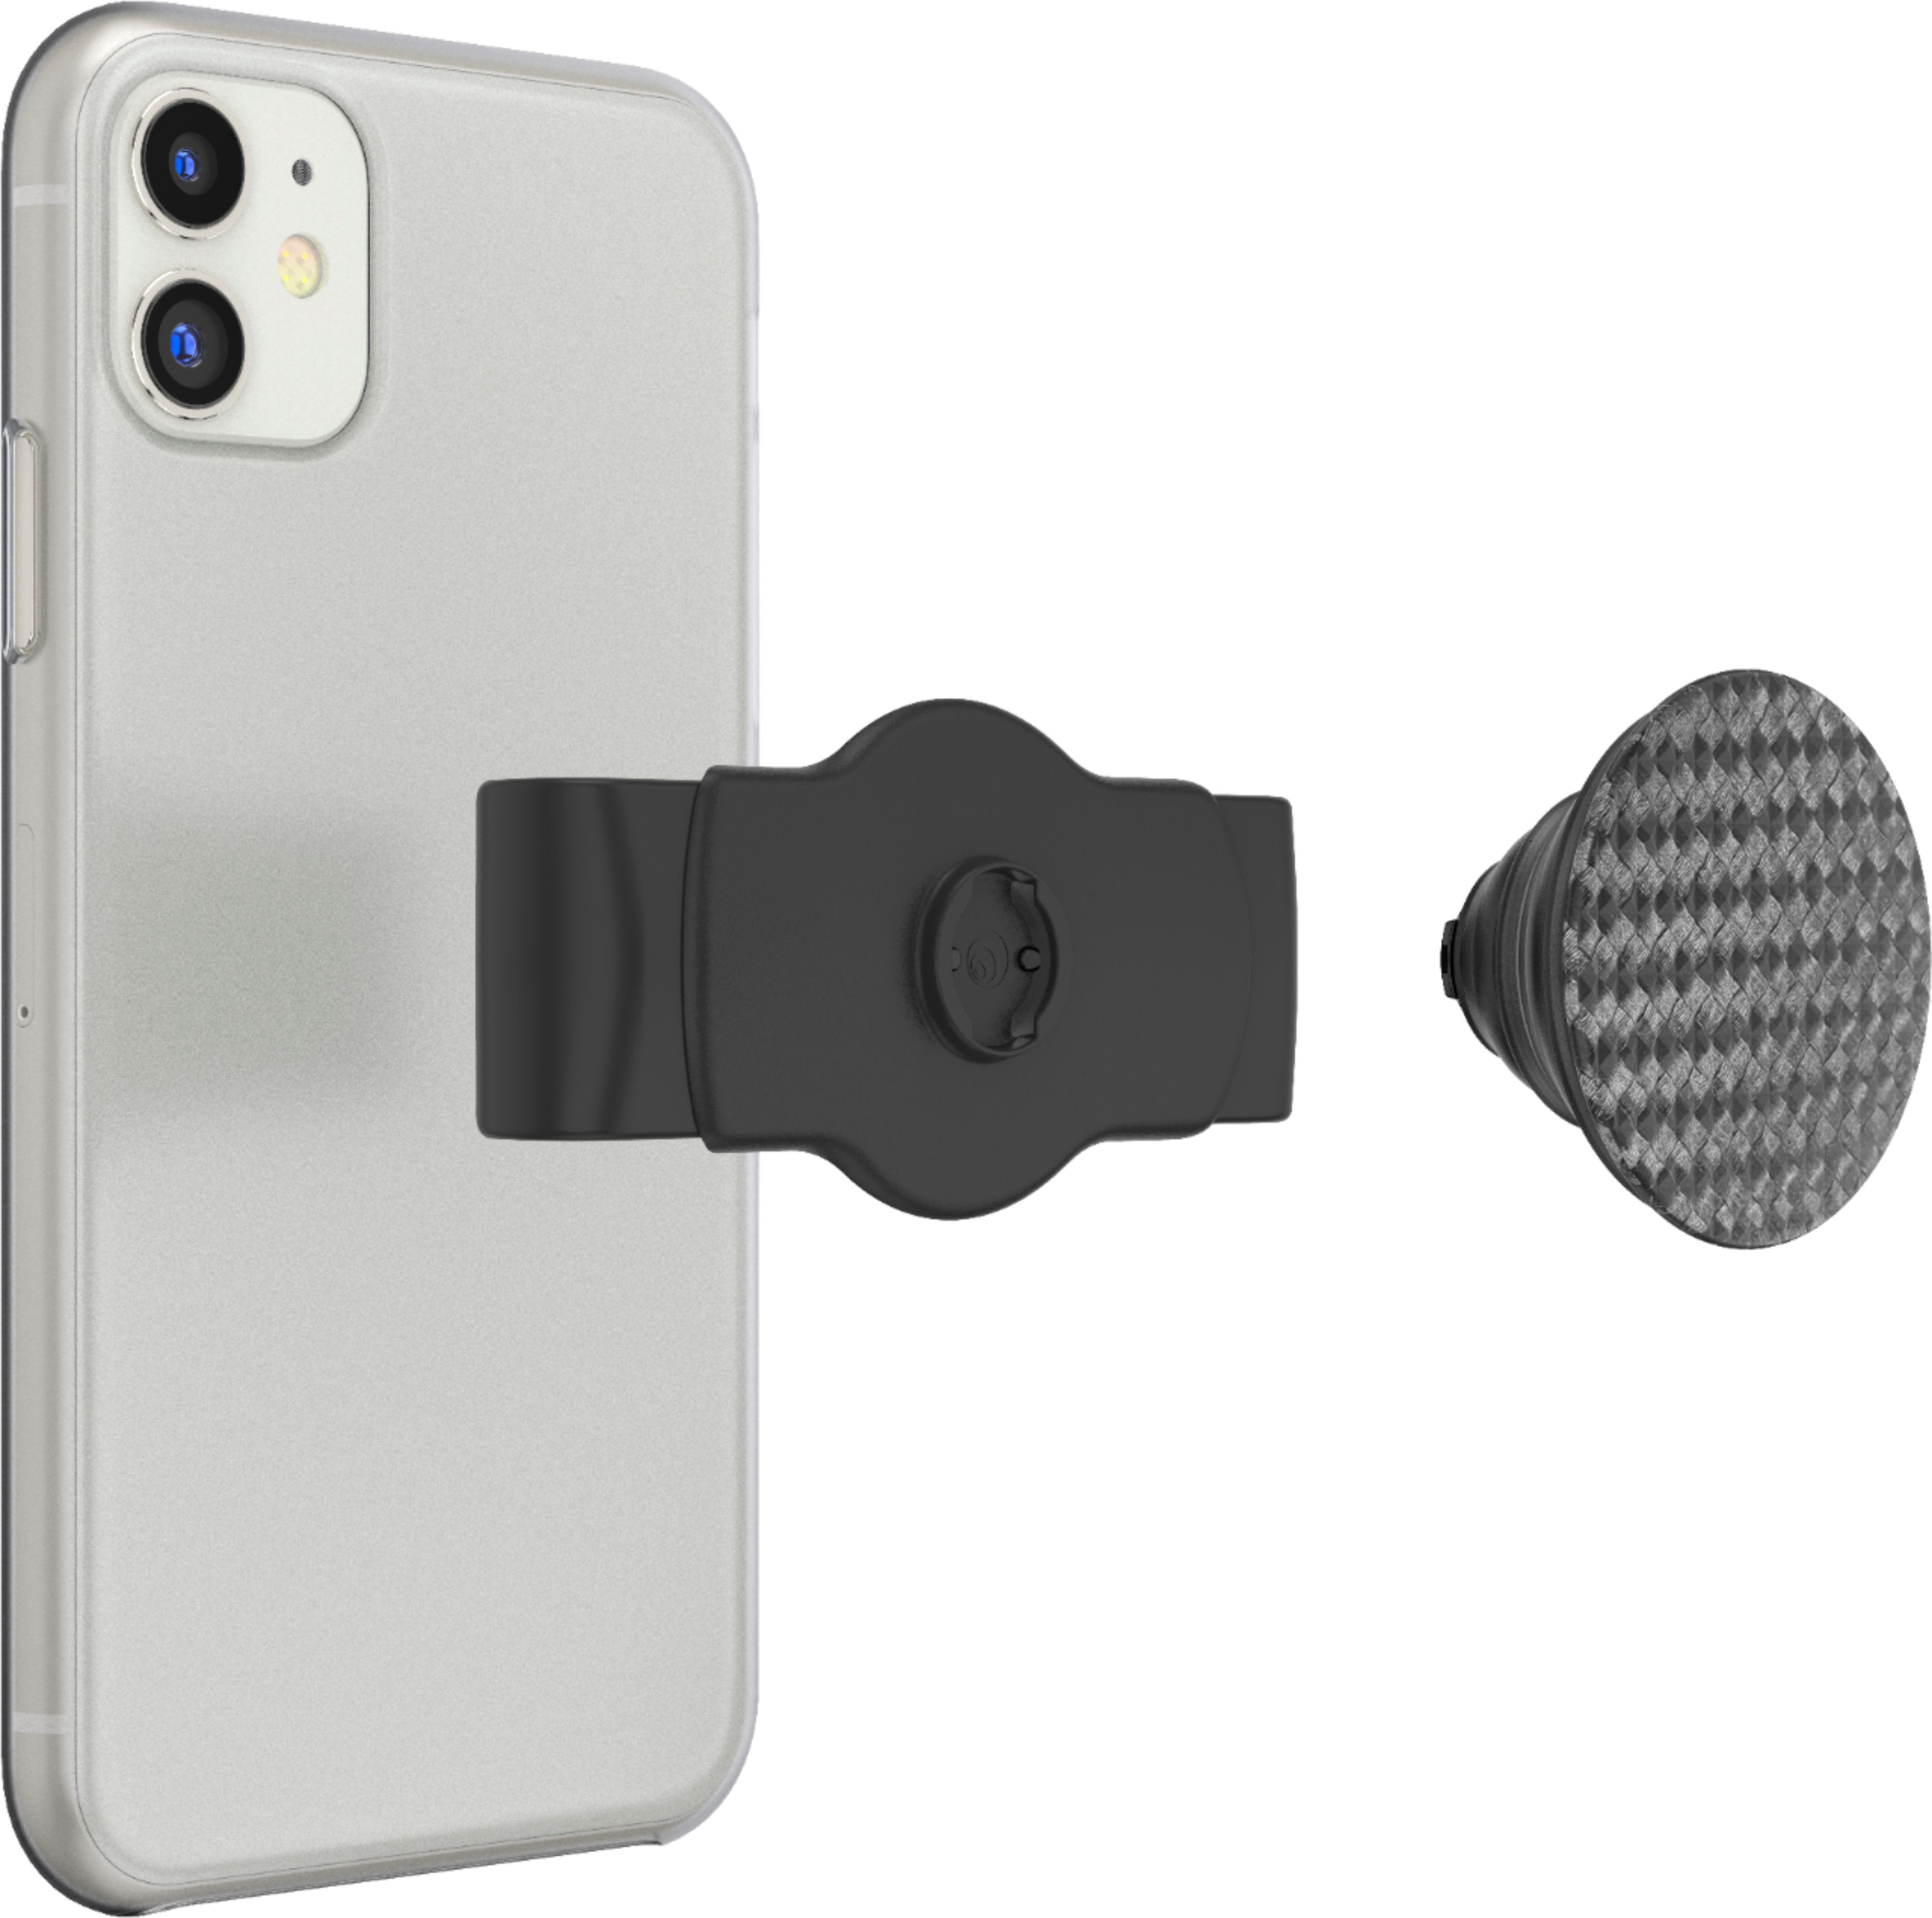 Angle View: Ledetech - Cell phone holder